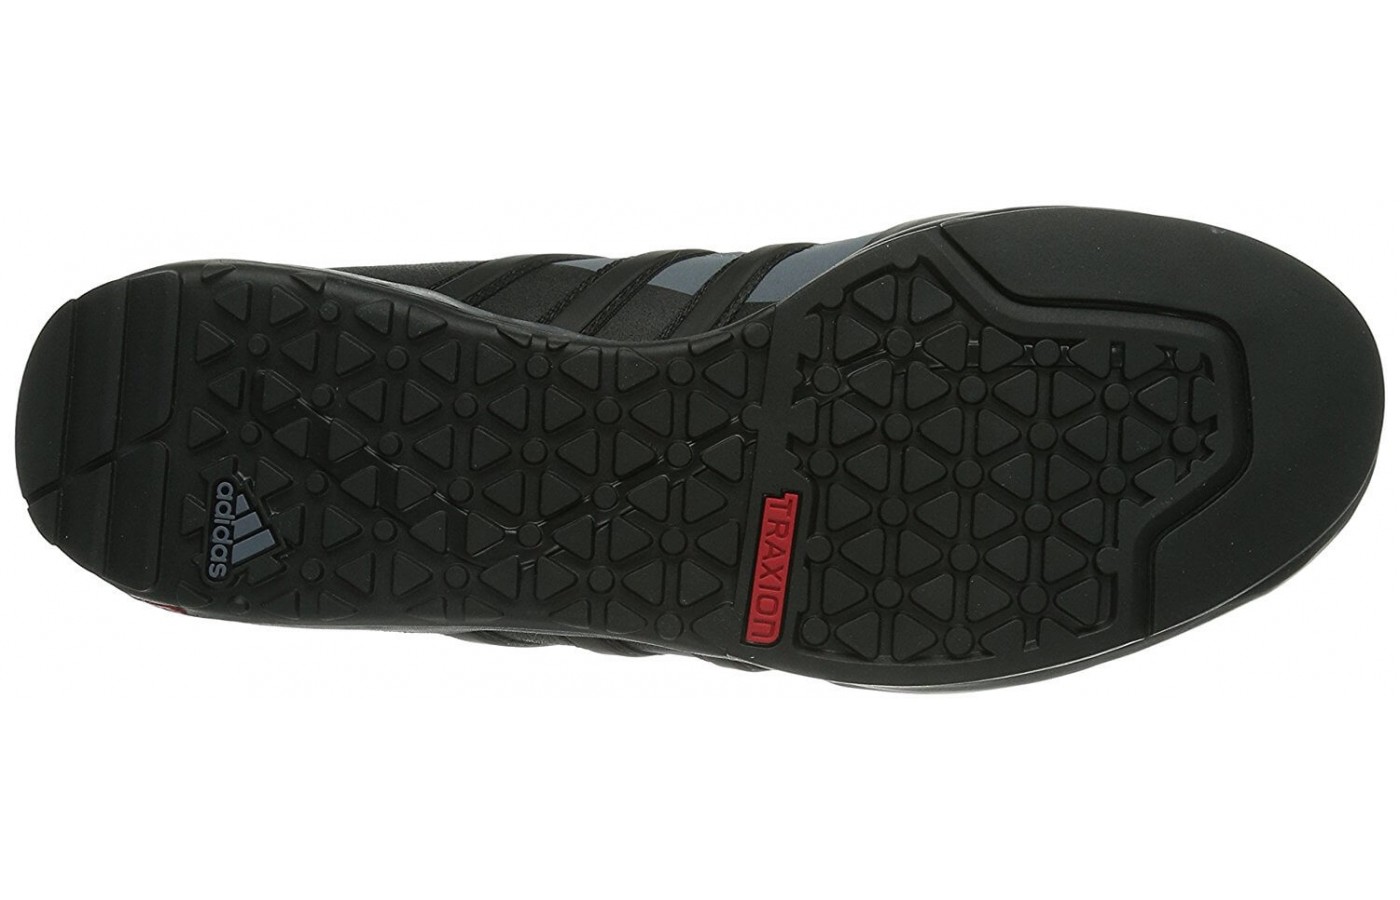 The Traxion and Forefoot stealth rubber add grip and traction. 